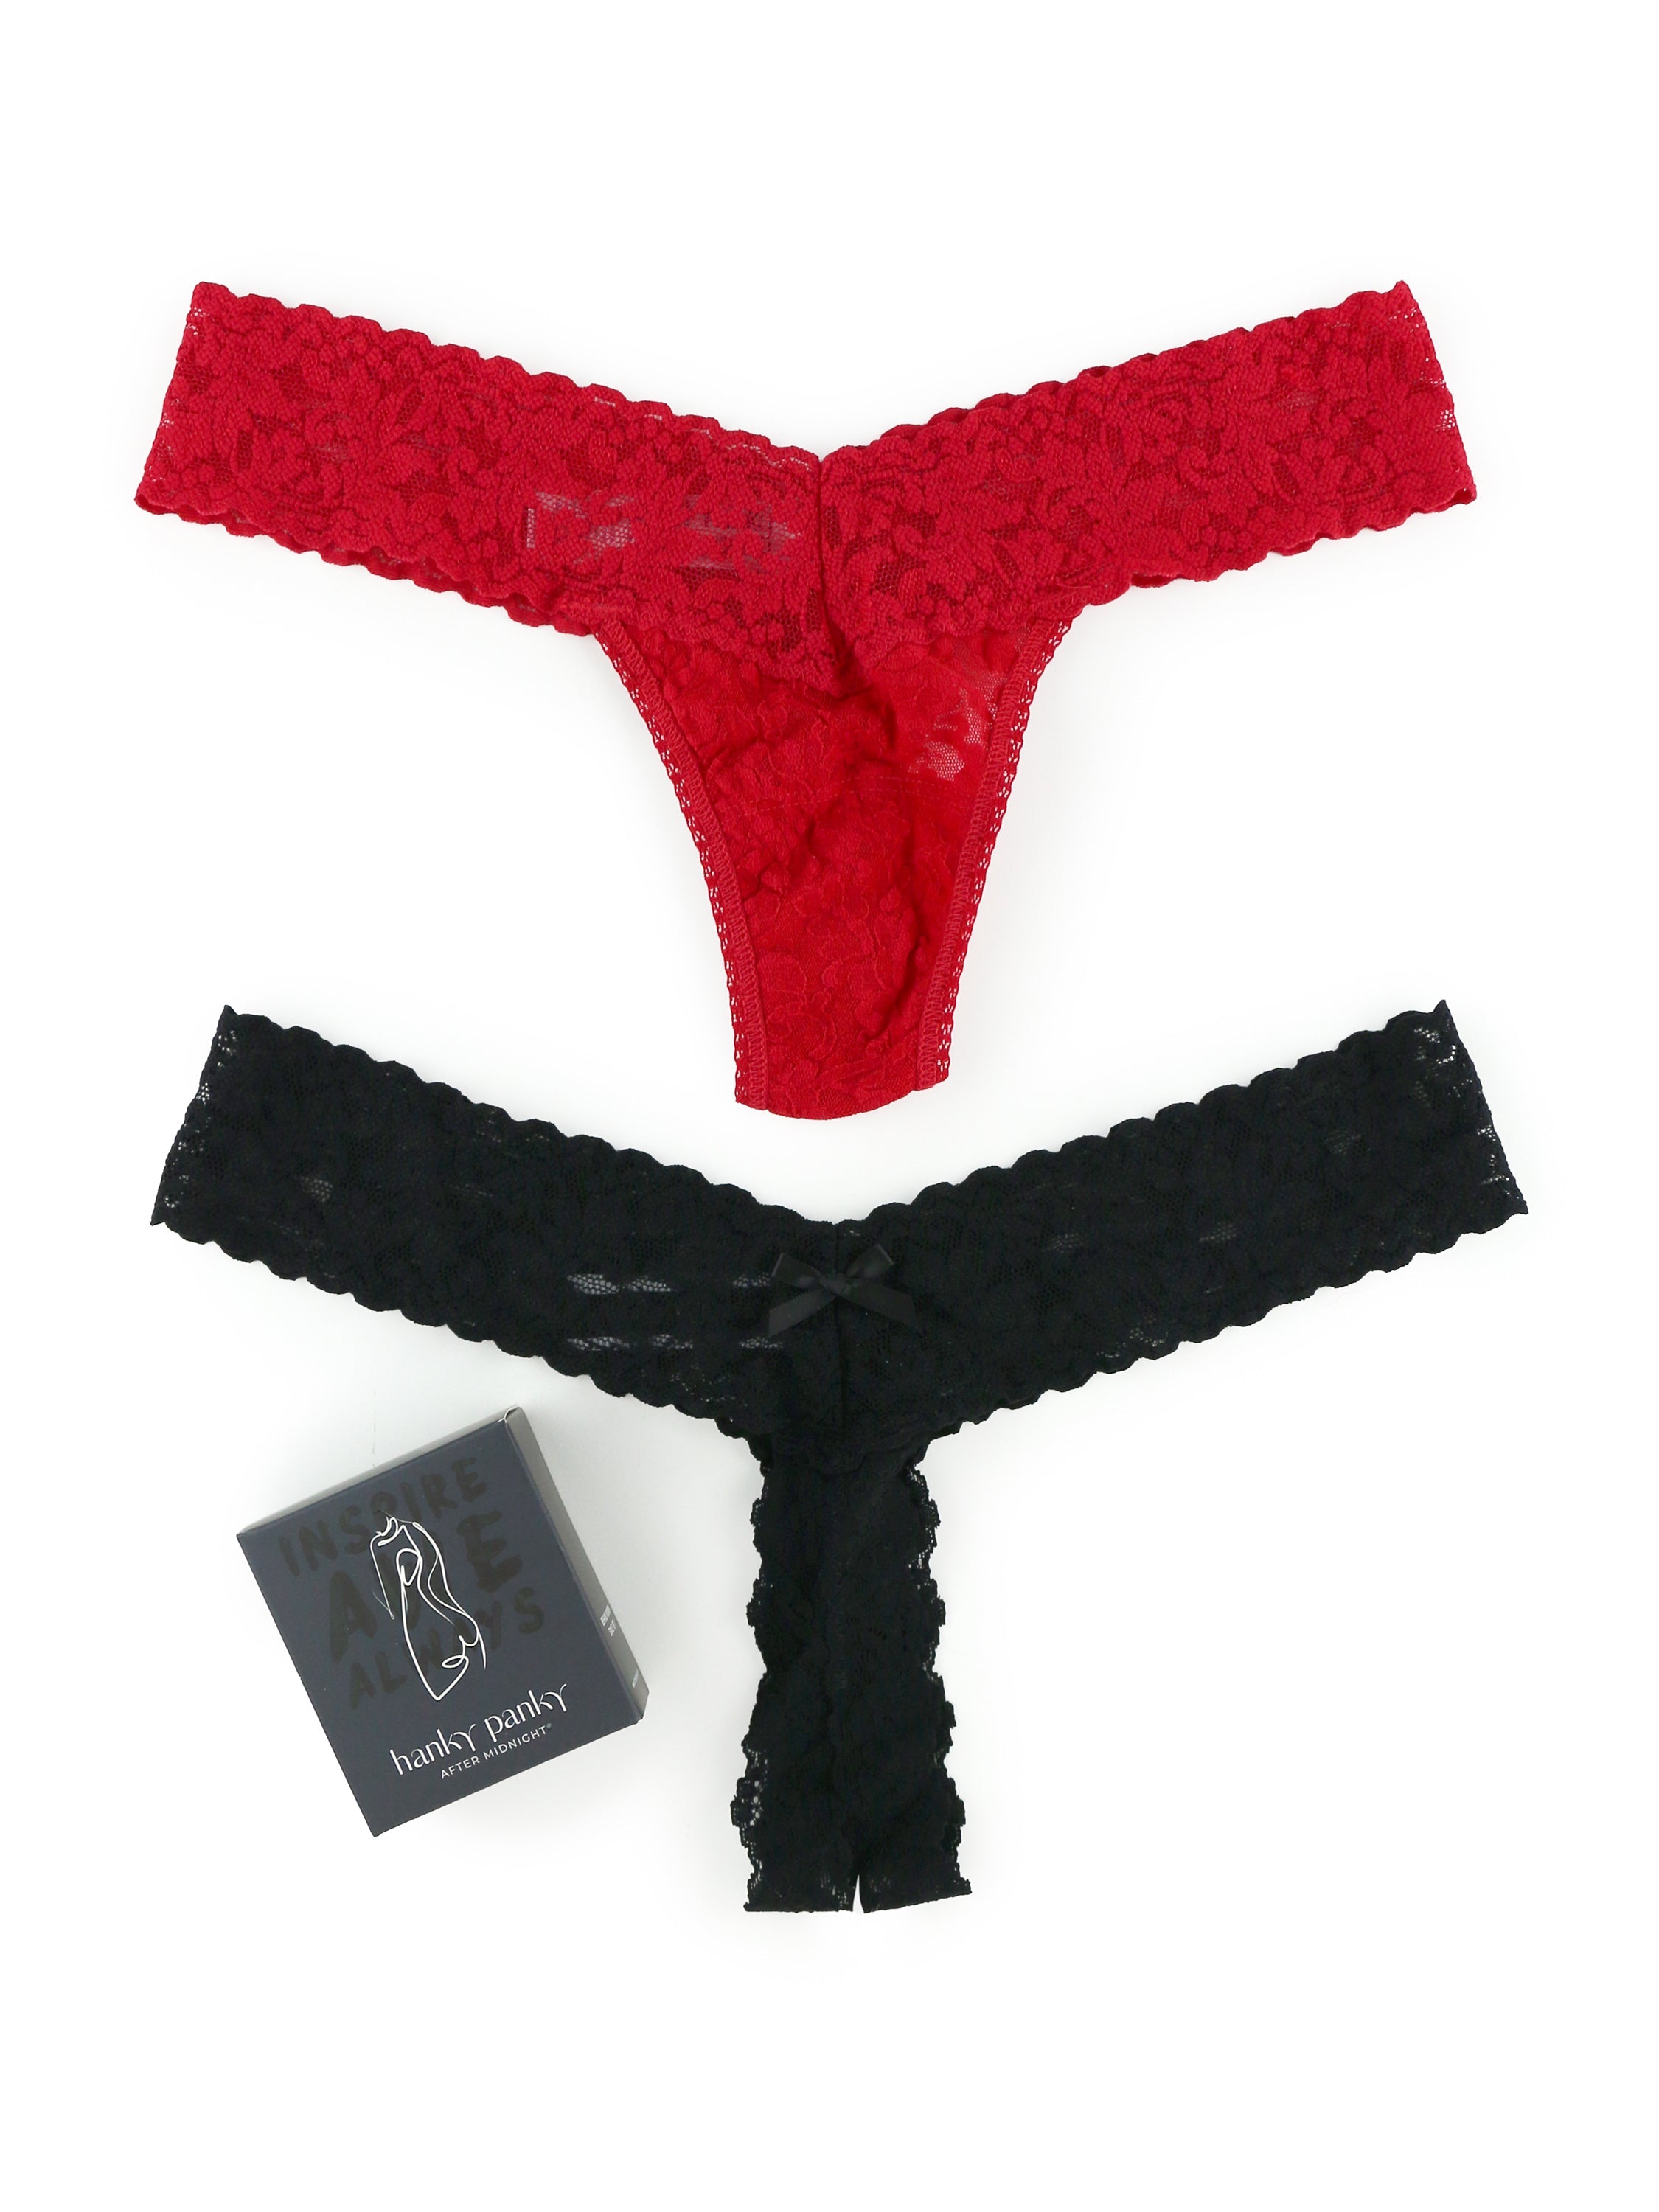 Crotchless Thong Panties & Underwear